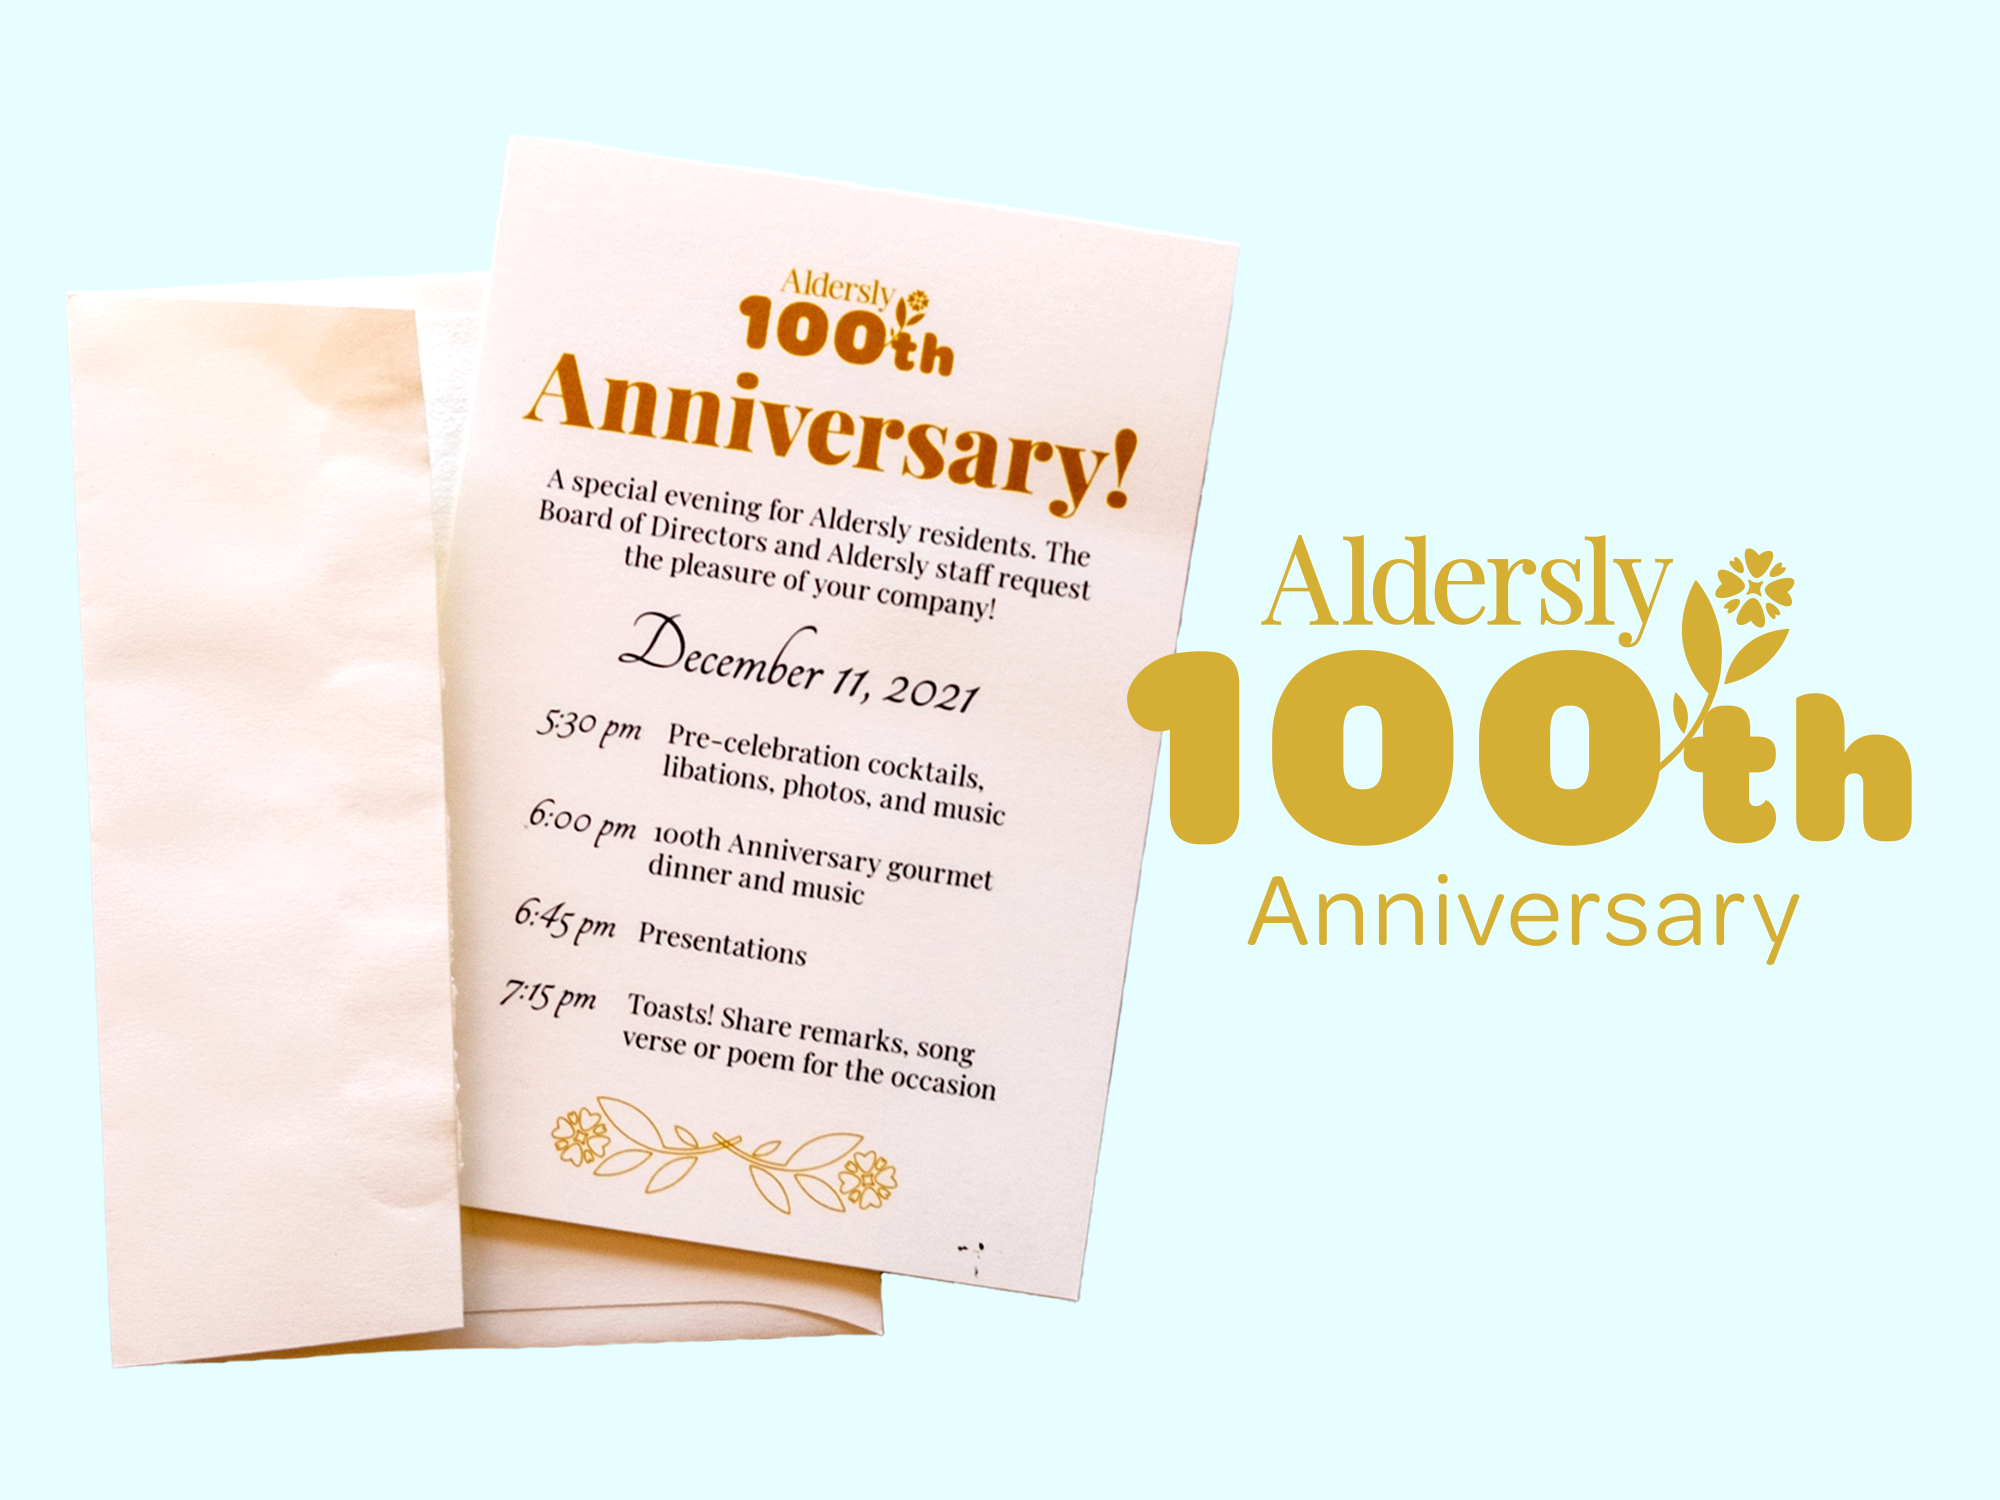 A paper envelope and invite with the digital Aldersly 100th logo displayed next to it